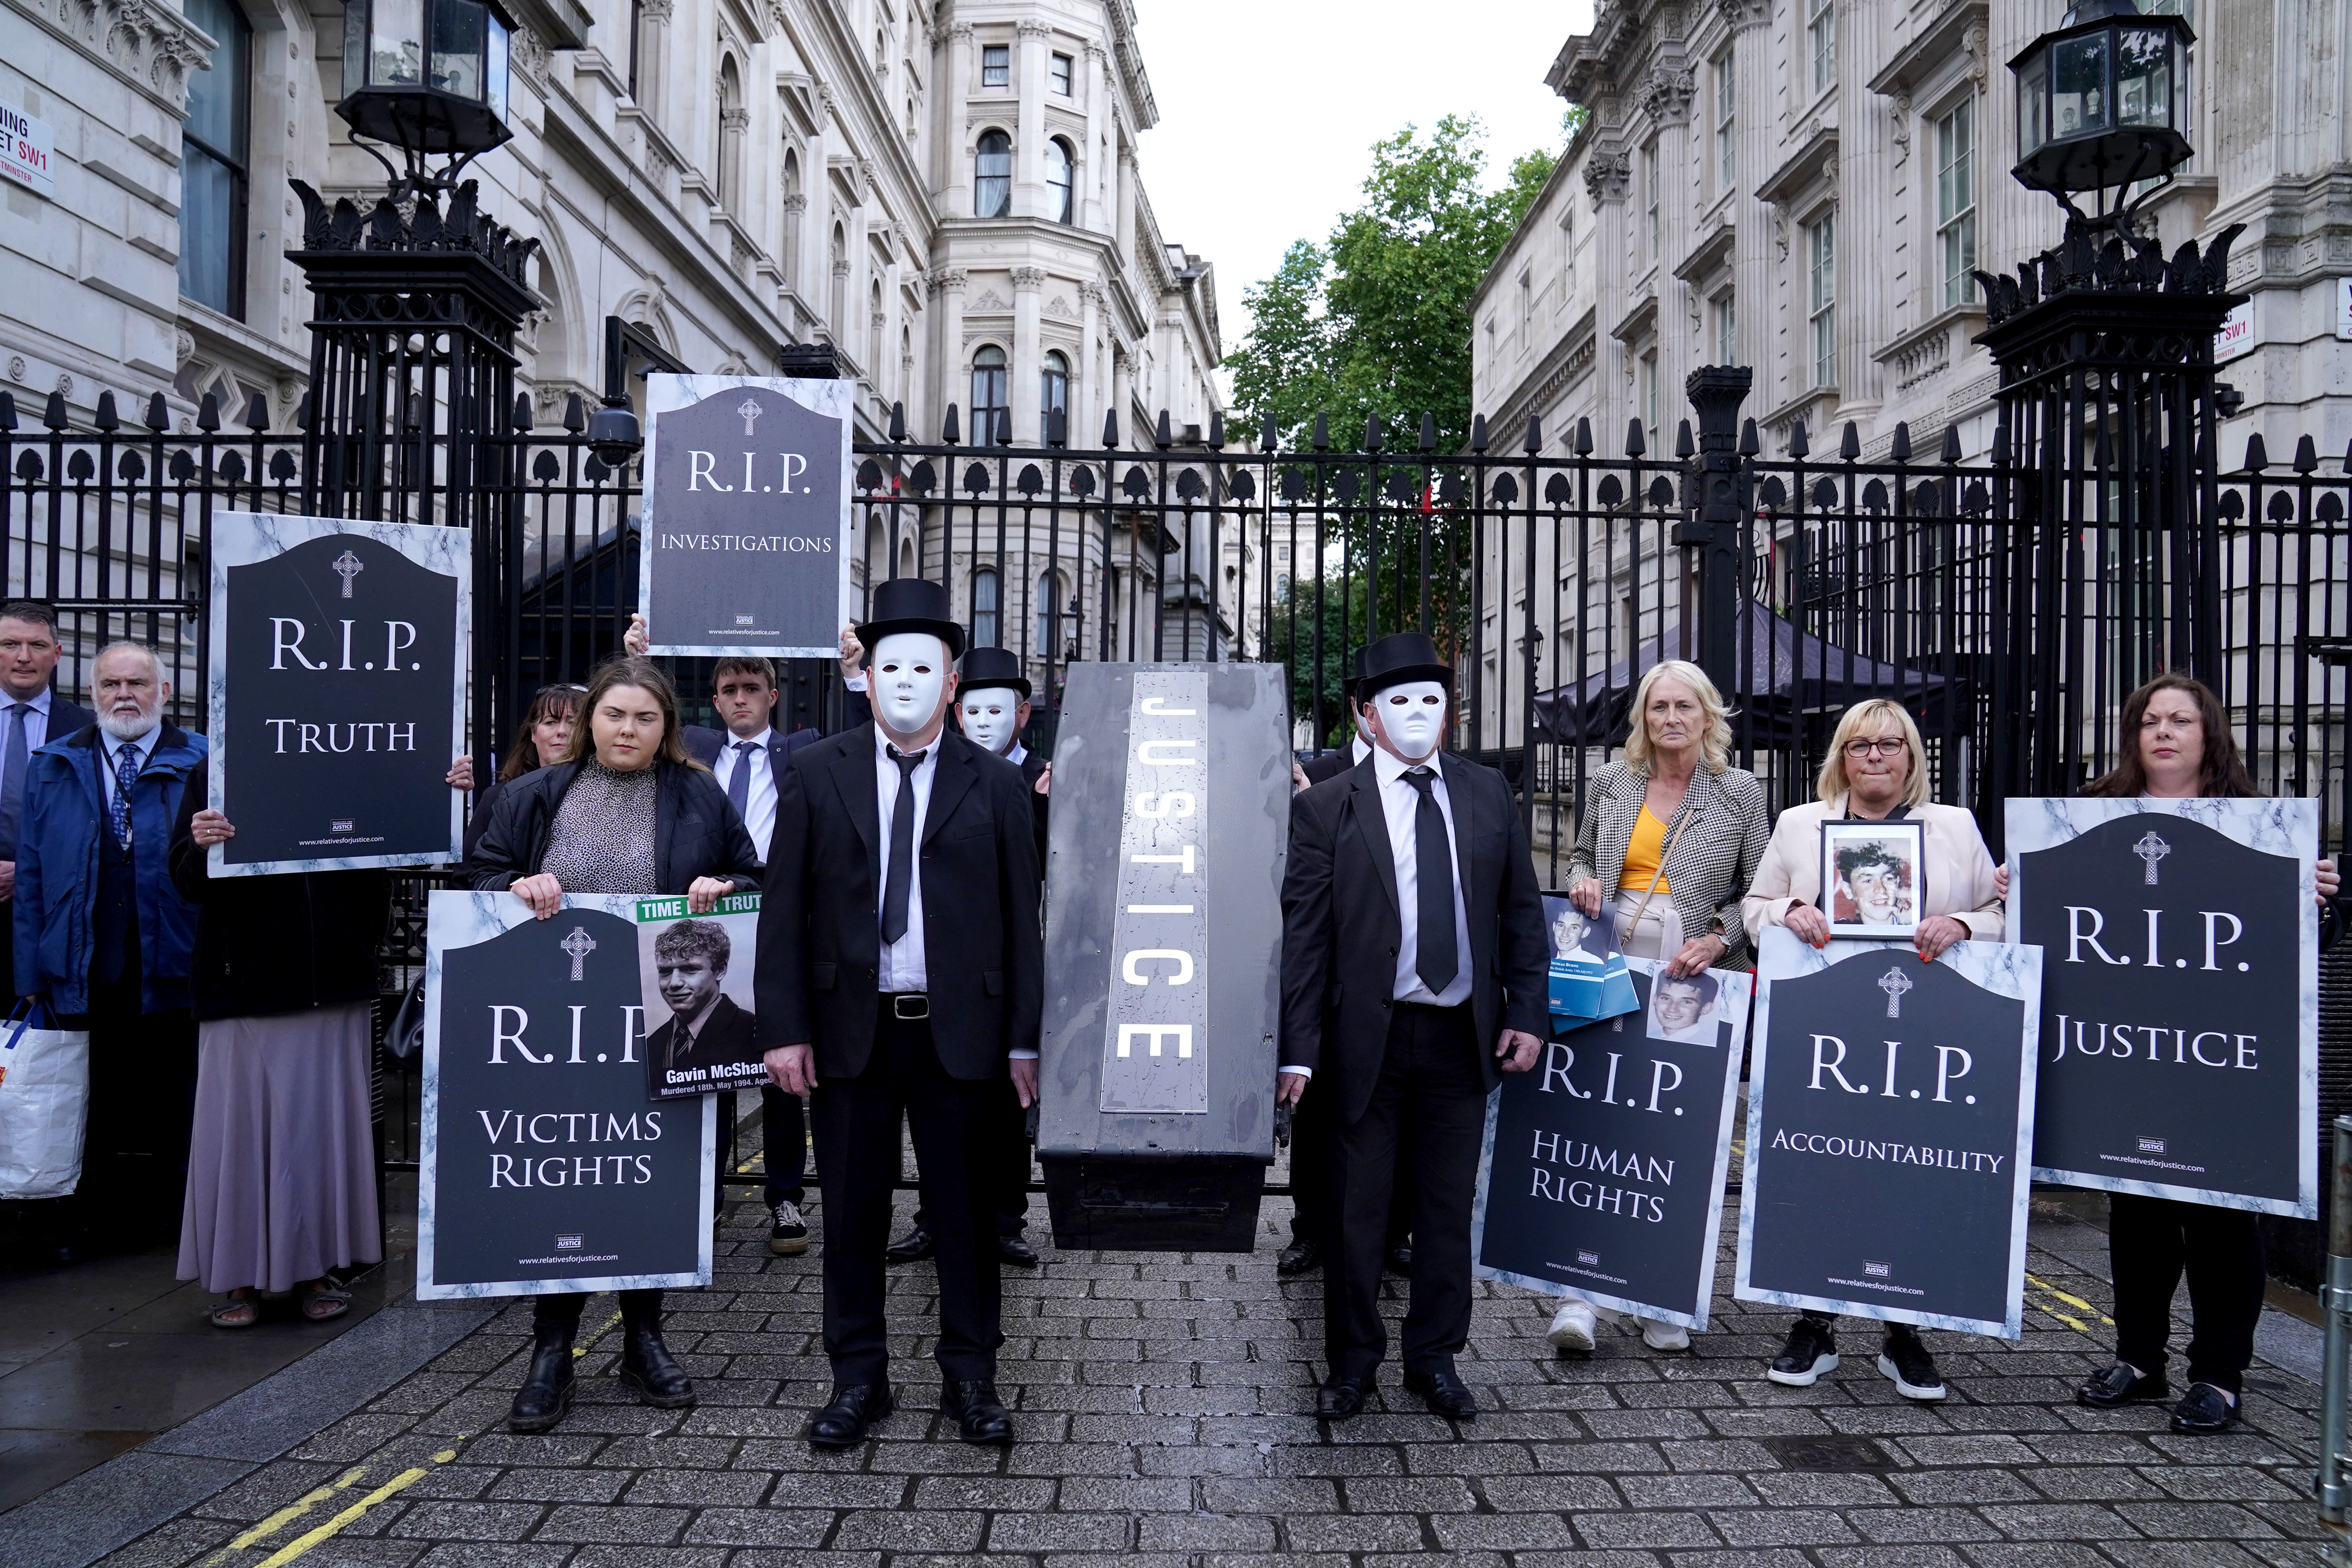 Representatives from Relatives for Justice, whose loved ones were murdered during the Troubles, protest outside Downing Street (PA)